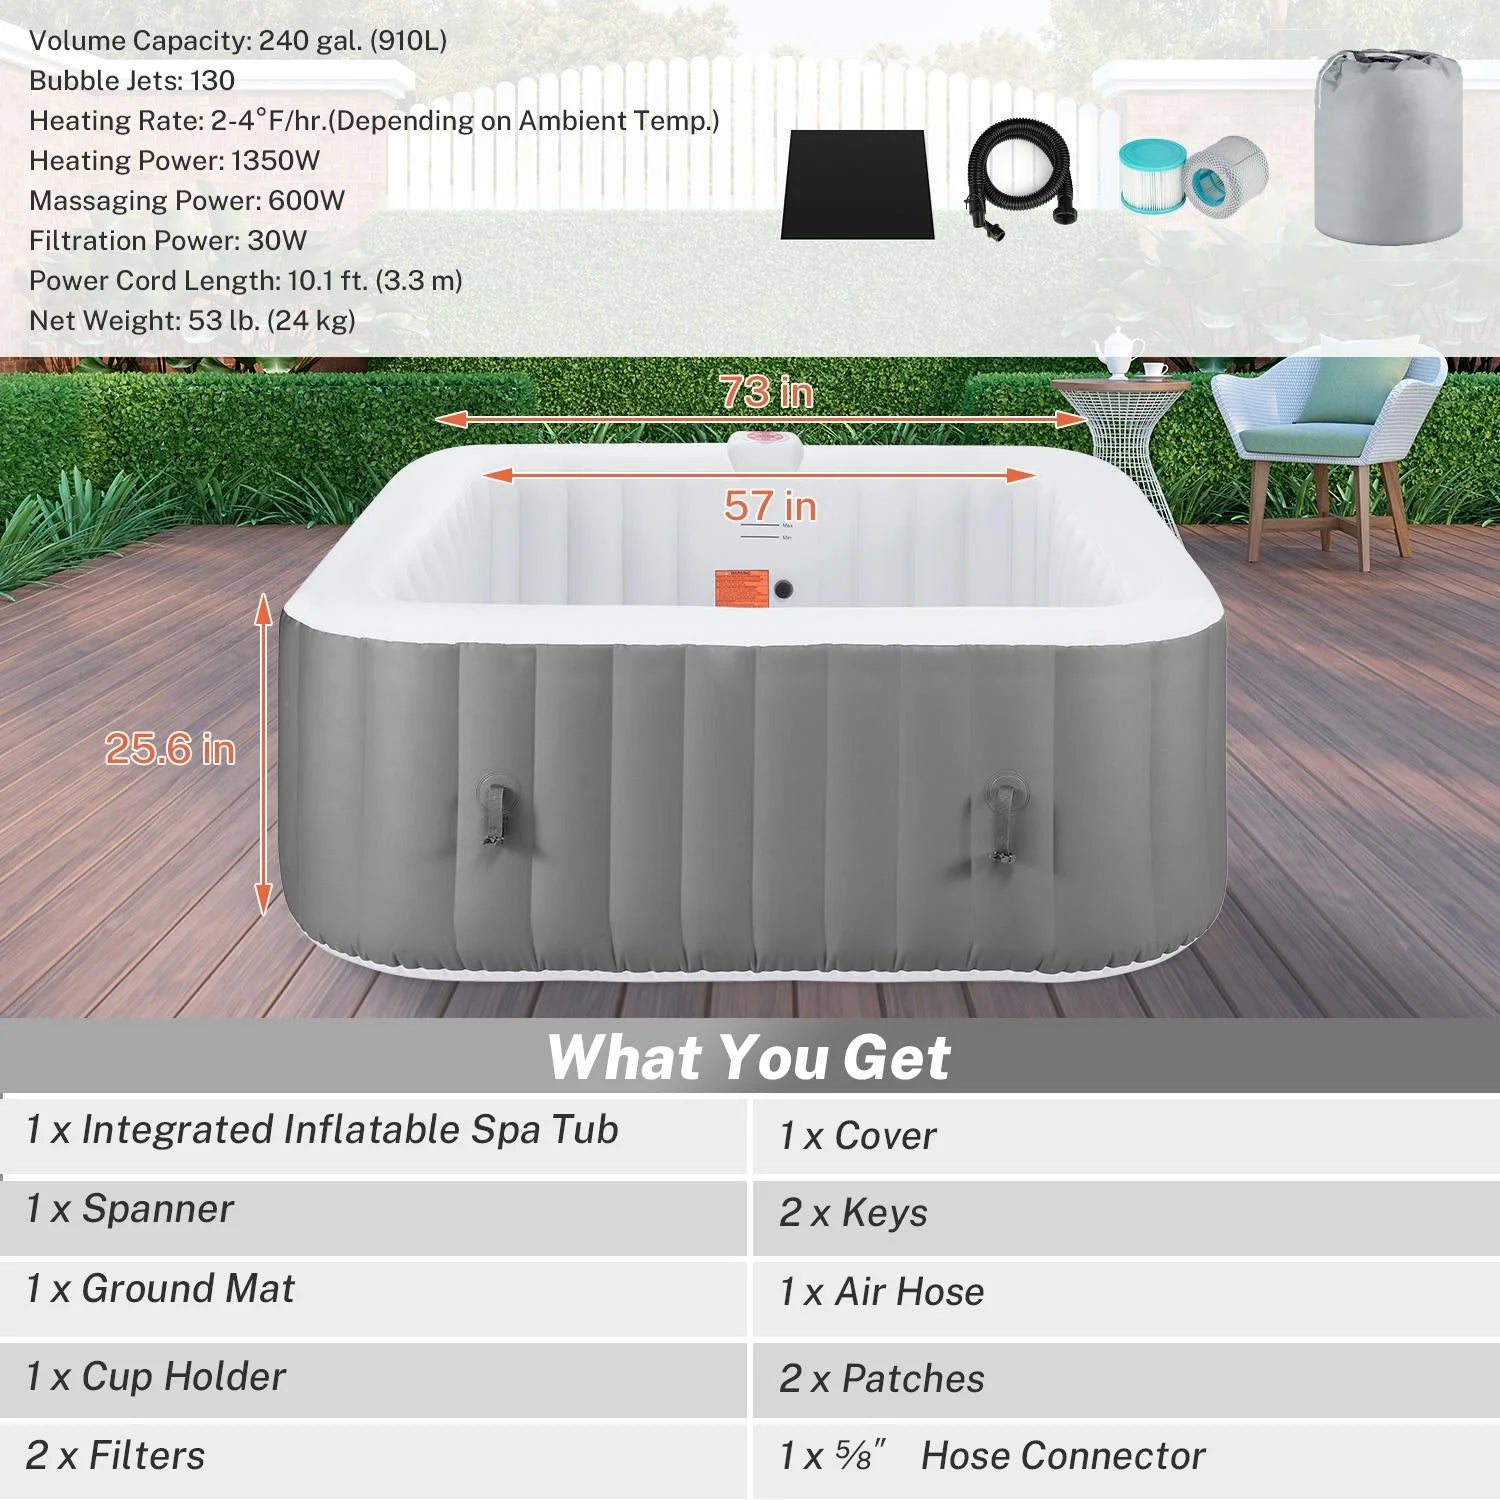 Upgraded Inflatable Hot Tub,  6 Person Hot Tub with Hidden Pump, Portable Spa Tub Outdoor Indoor Use W/130Pcs Jet, Lockable Cover, Storage Bag, Cover, 240Gal